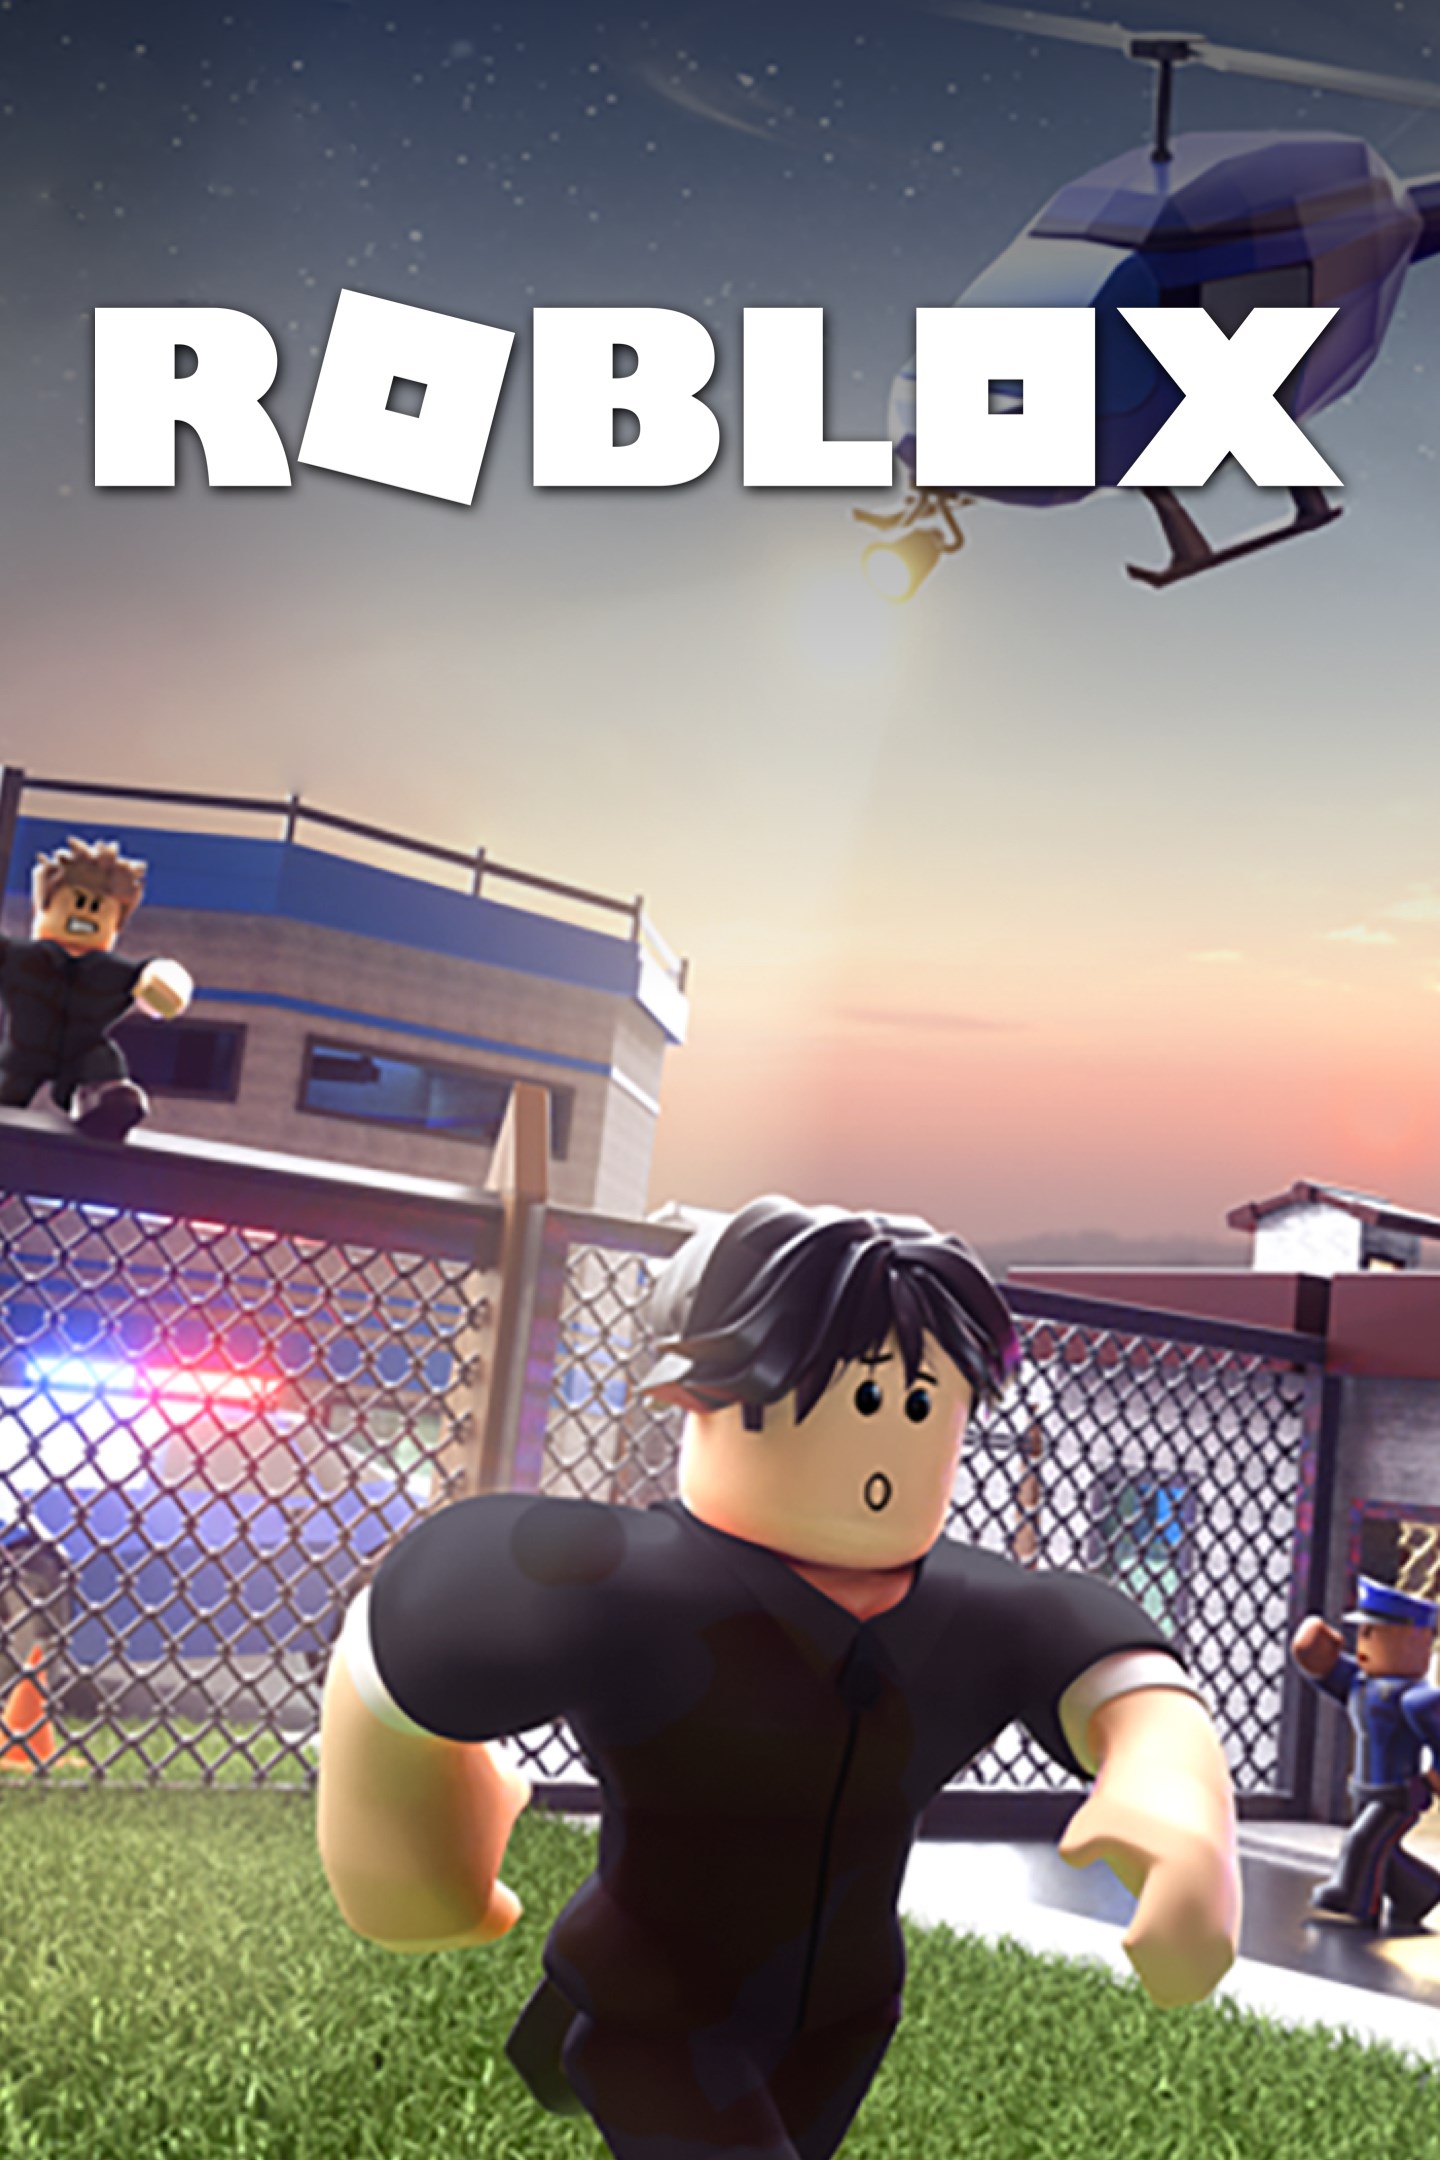 Roblox Sign Up In Game